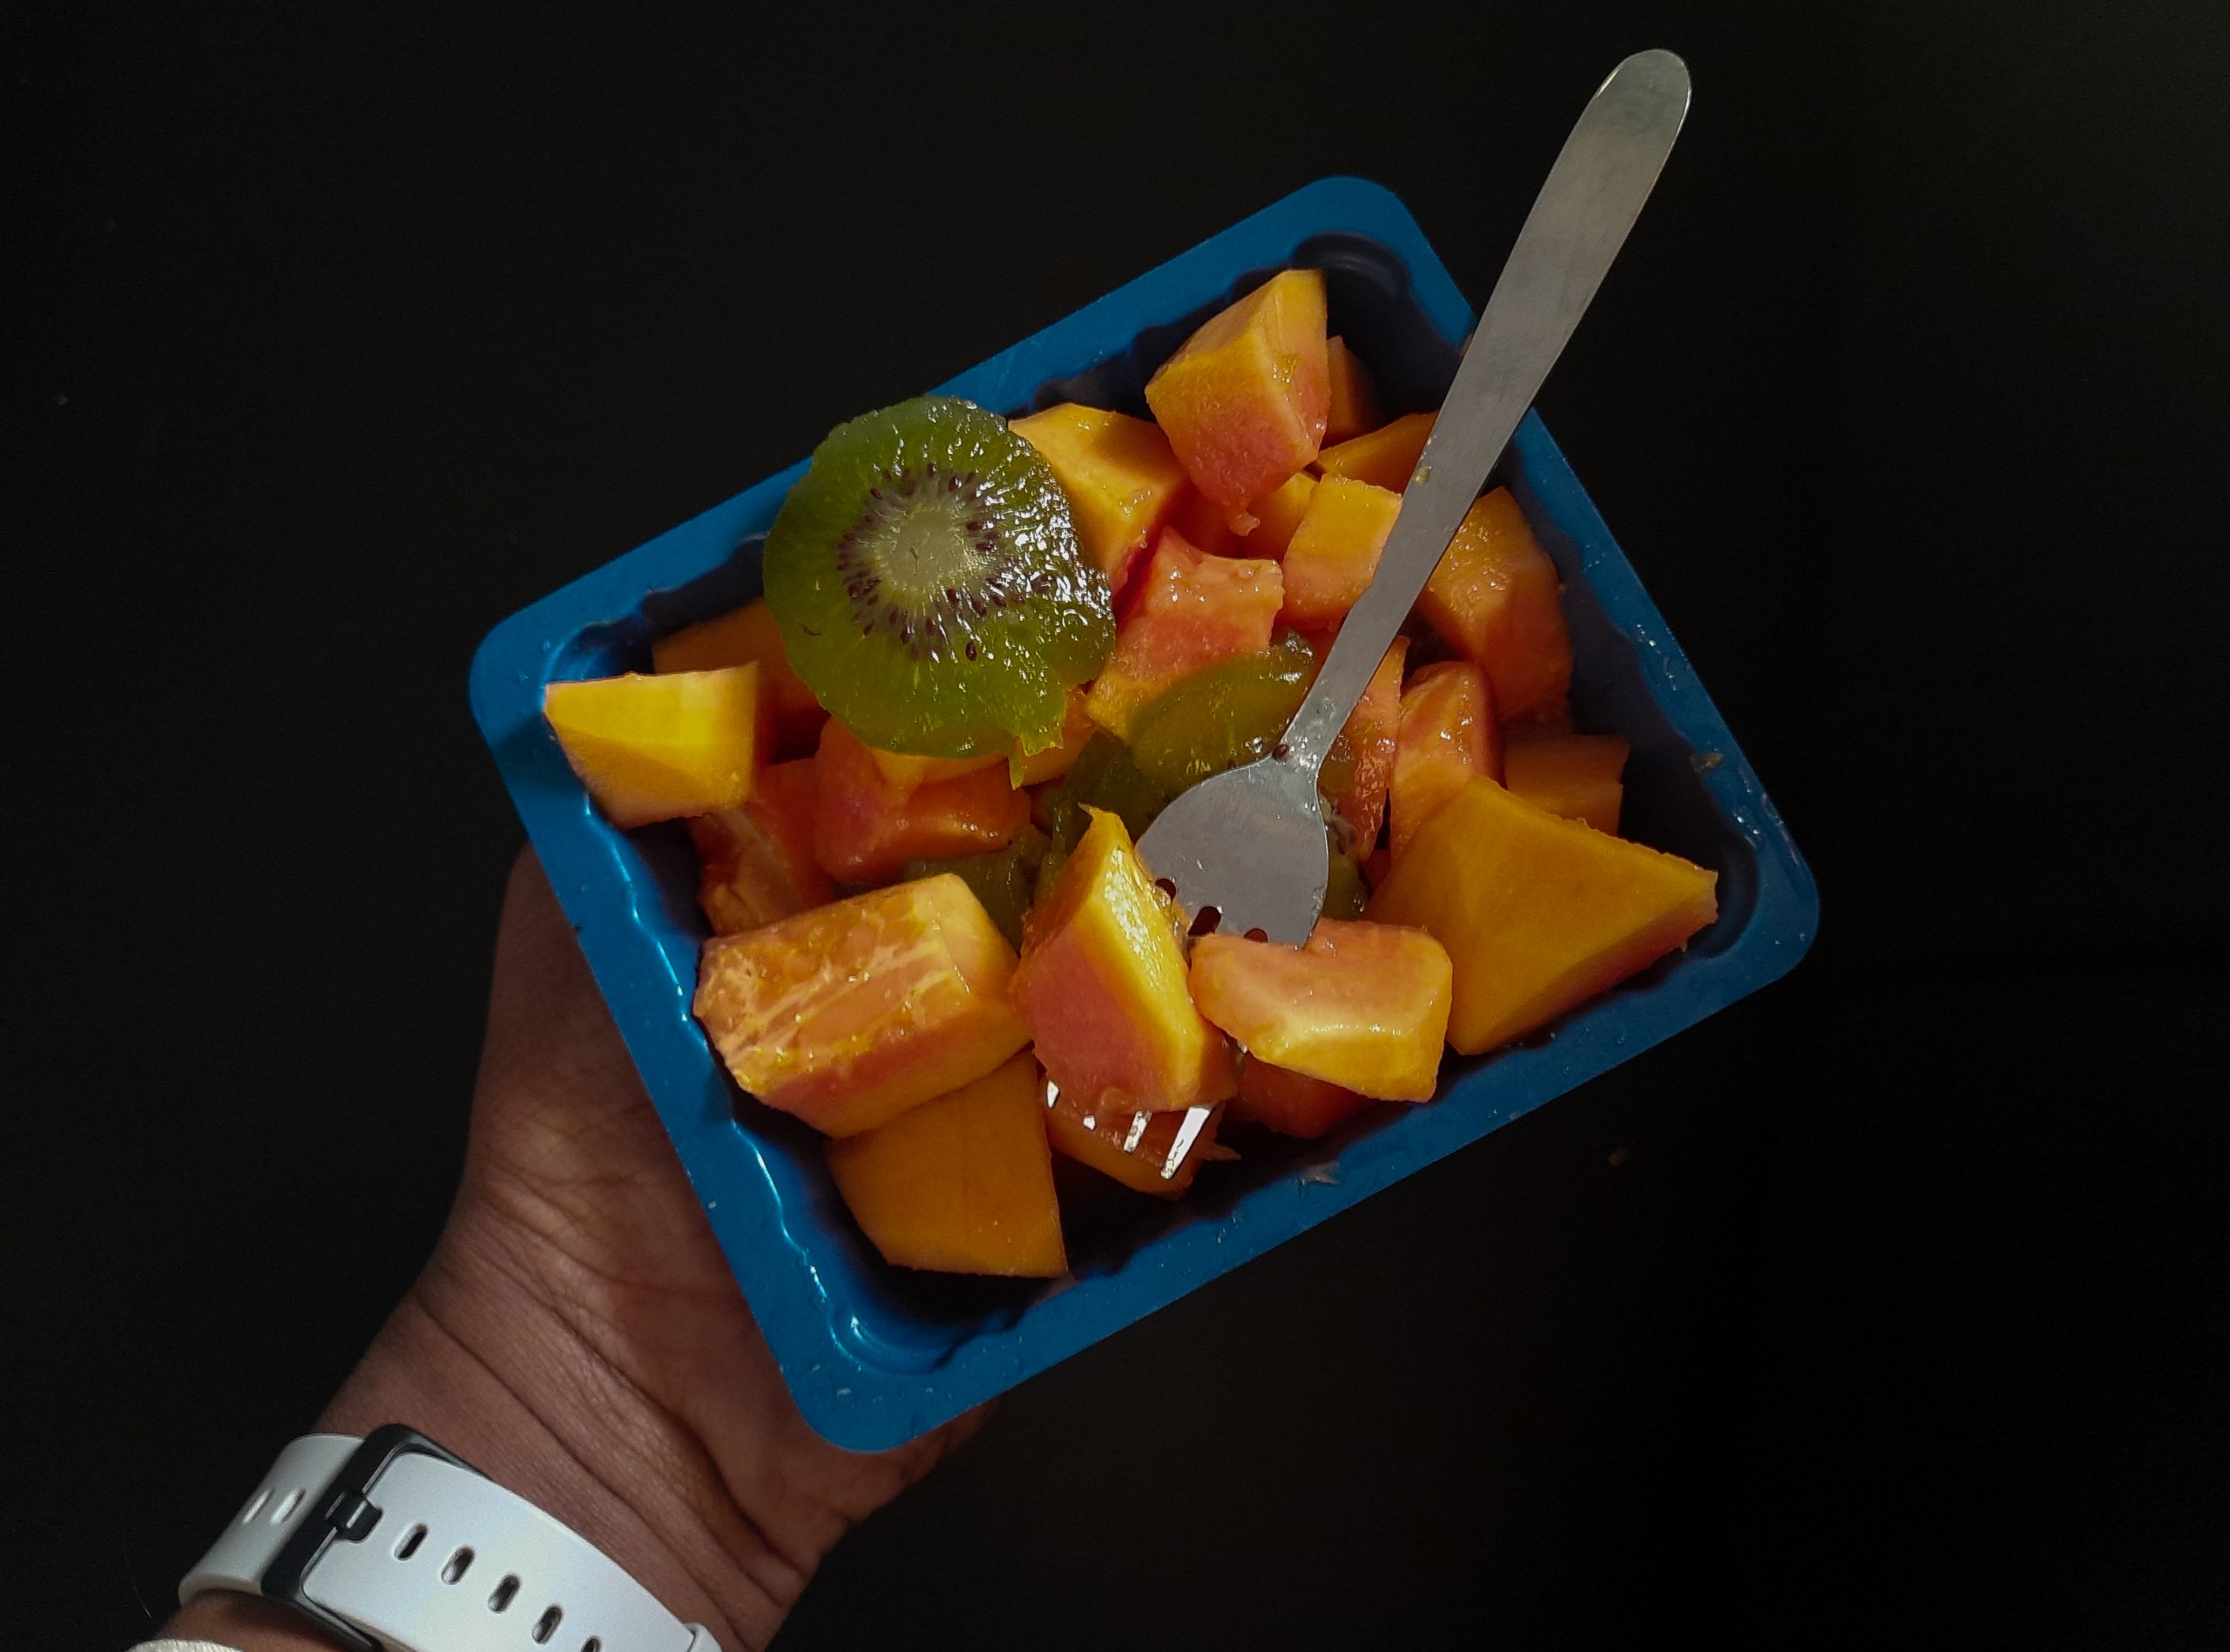 Sliced fruits in a blue box